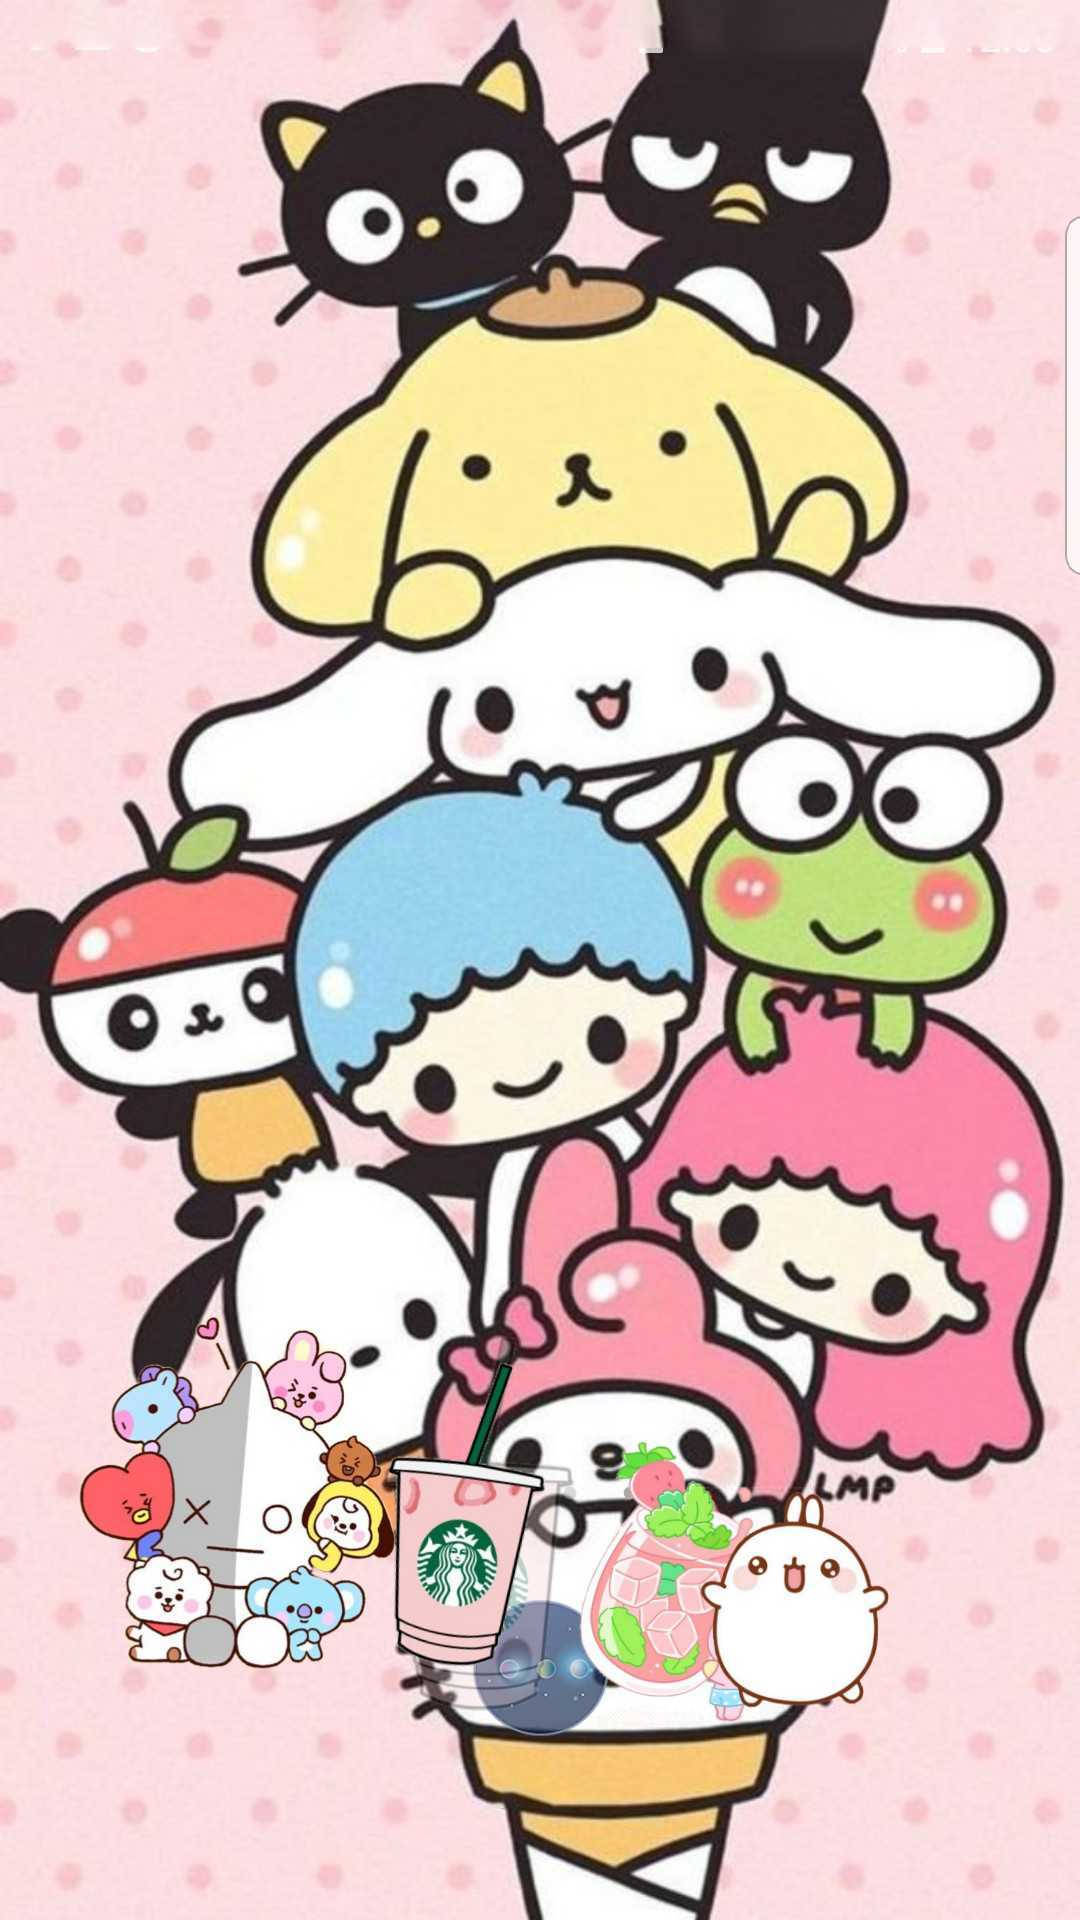 An adorable Sanrio character to brighten your day! Wallpaper